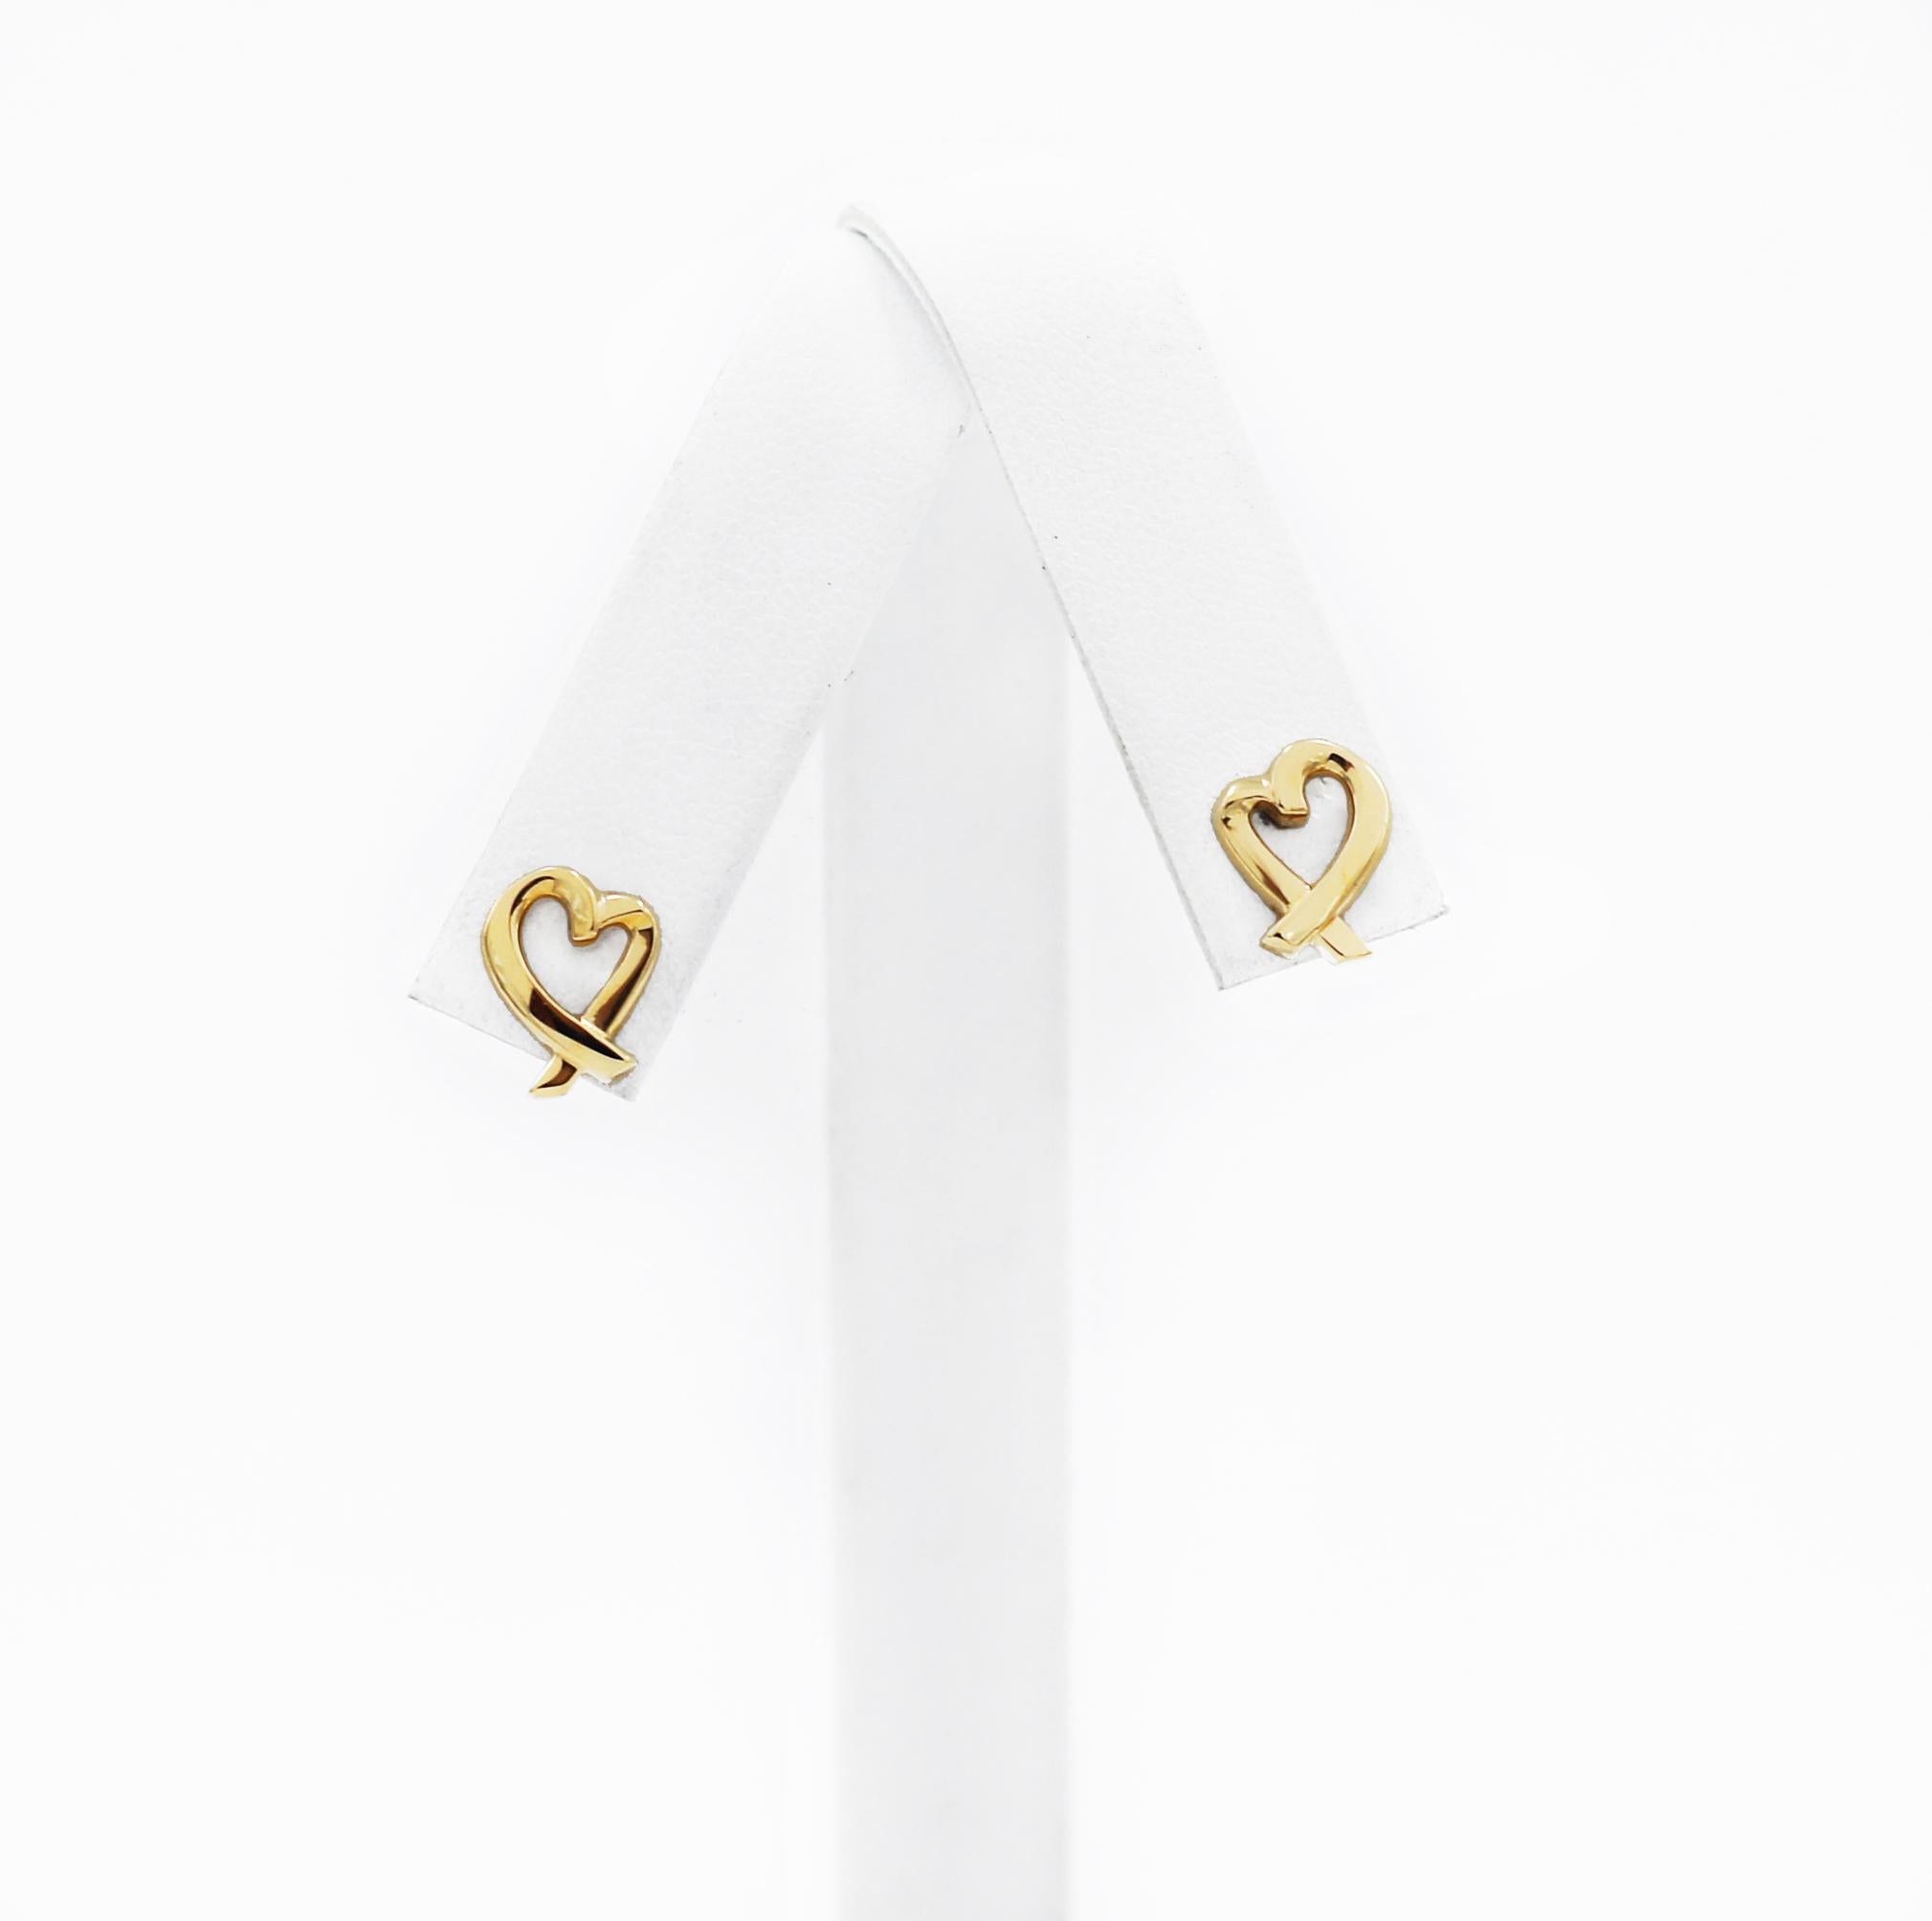 Tiffany & Co. Paloma Picasso 18K Yellow Gold Loving Heart Earrings

These open heart earrings are set in 18K yellow gold.

Hearts are approx. 10mm in length by 8mm wide.

Stamped: T&Co. 750 Paloma Picasso on back of earrings, T&Co. 750 on posts and